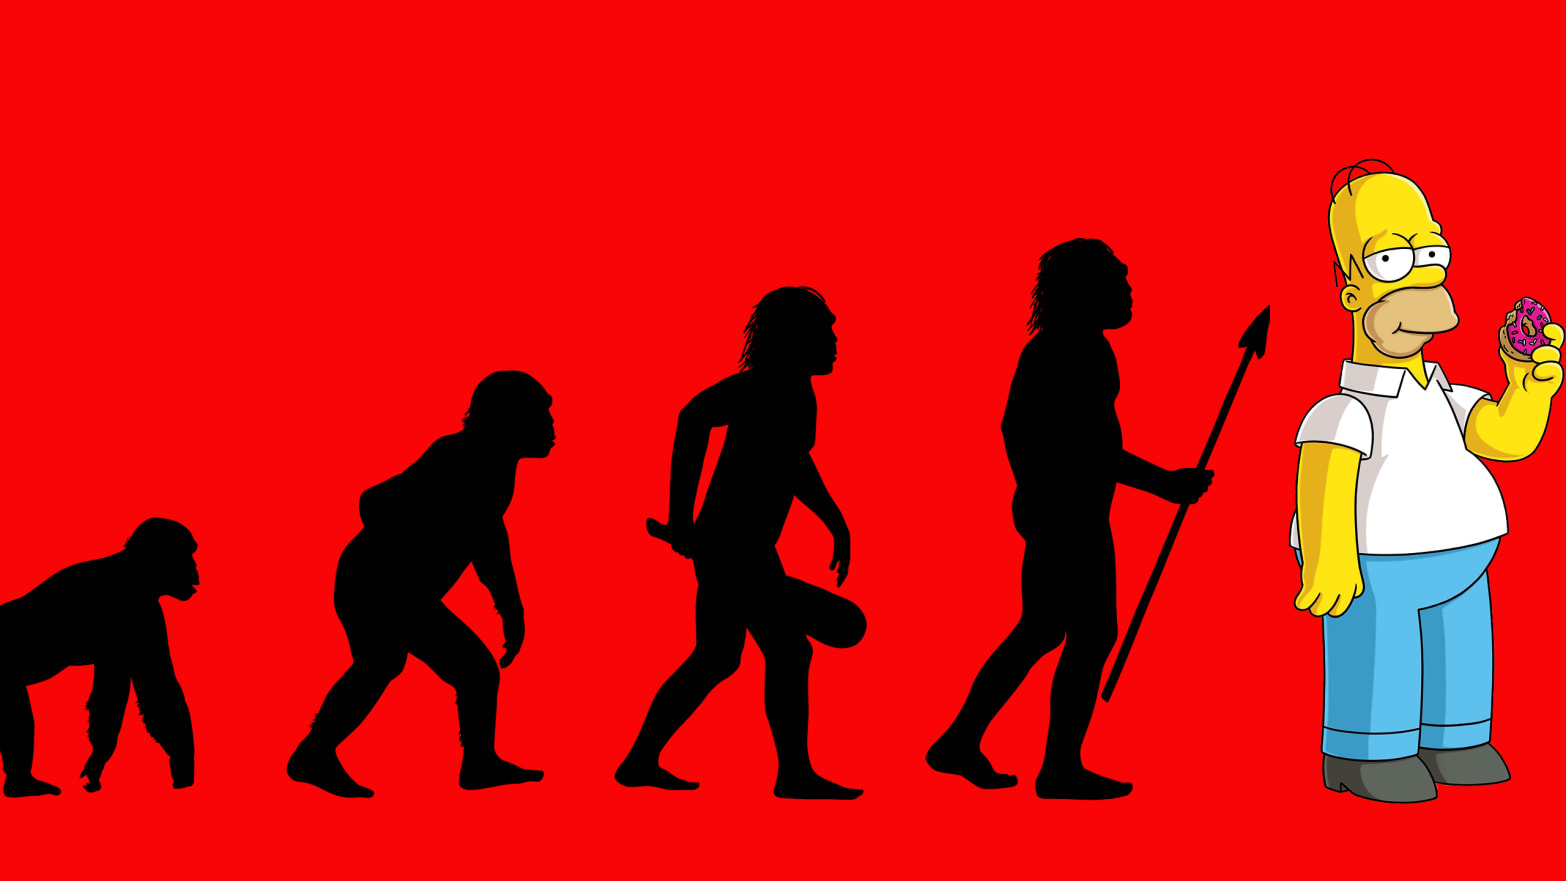 primate to human evolution image with homer simpson eating a donut at the end instead of human with red background vybarr cregan-reid cregan reid primate change anthropocene era sedentary lifestyle killing us